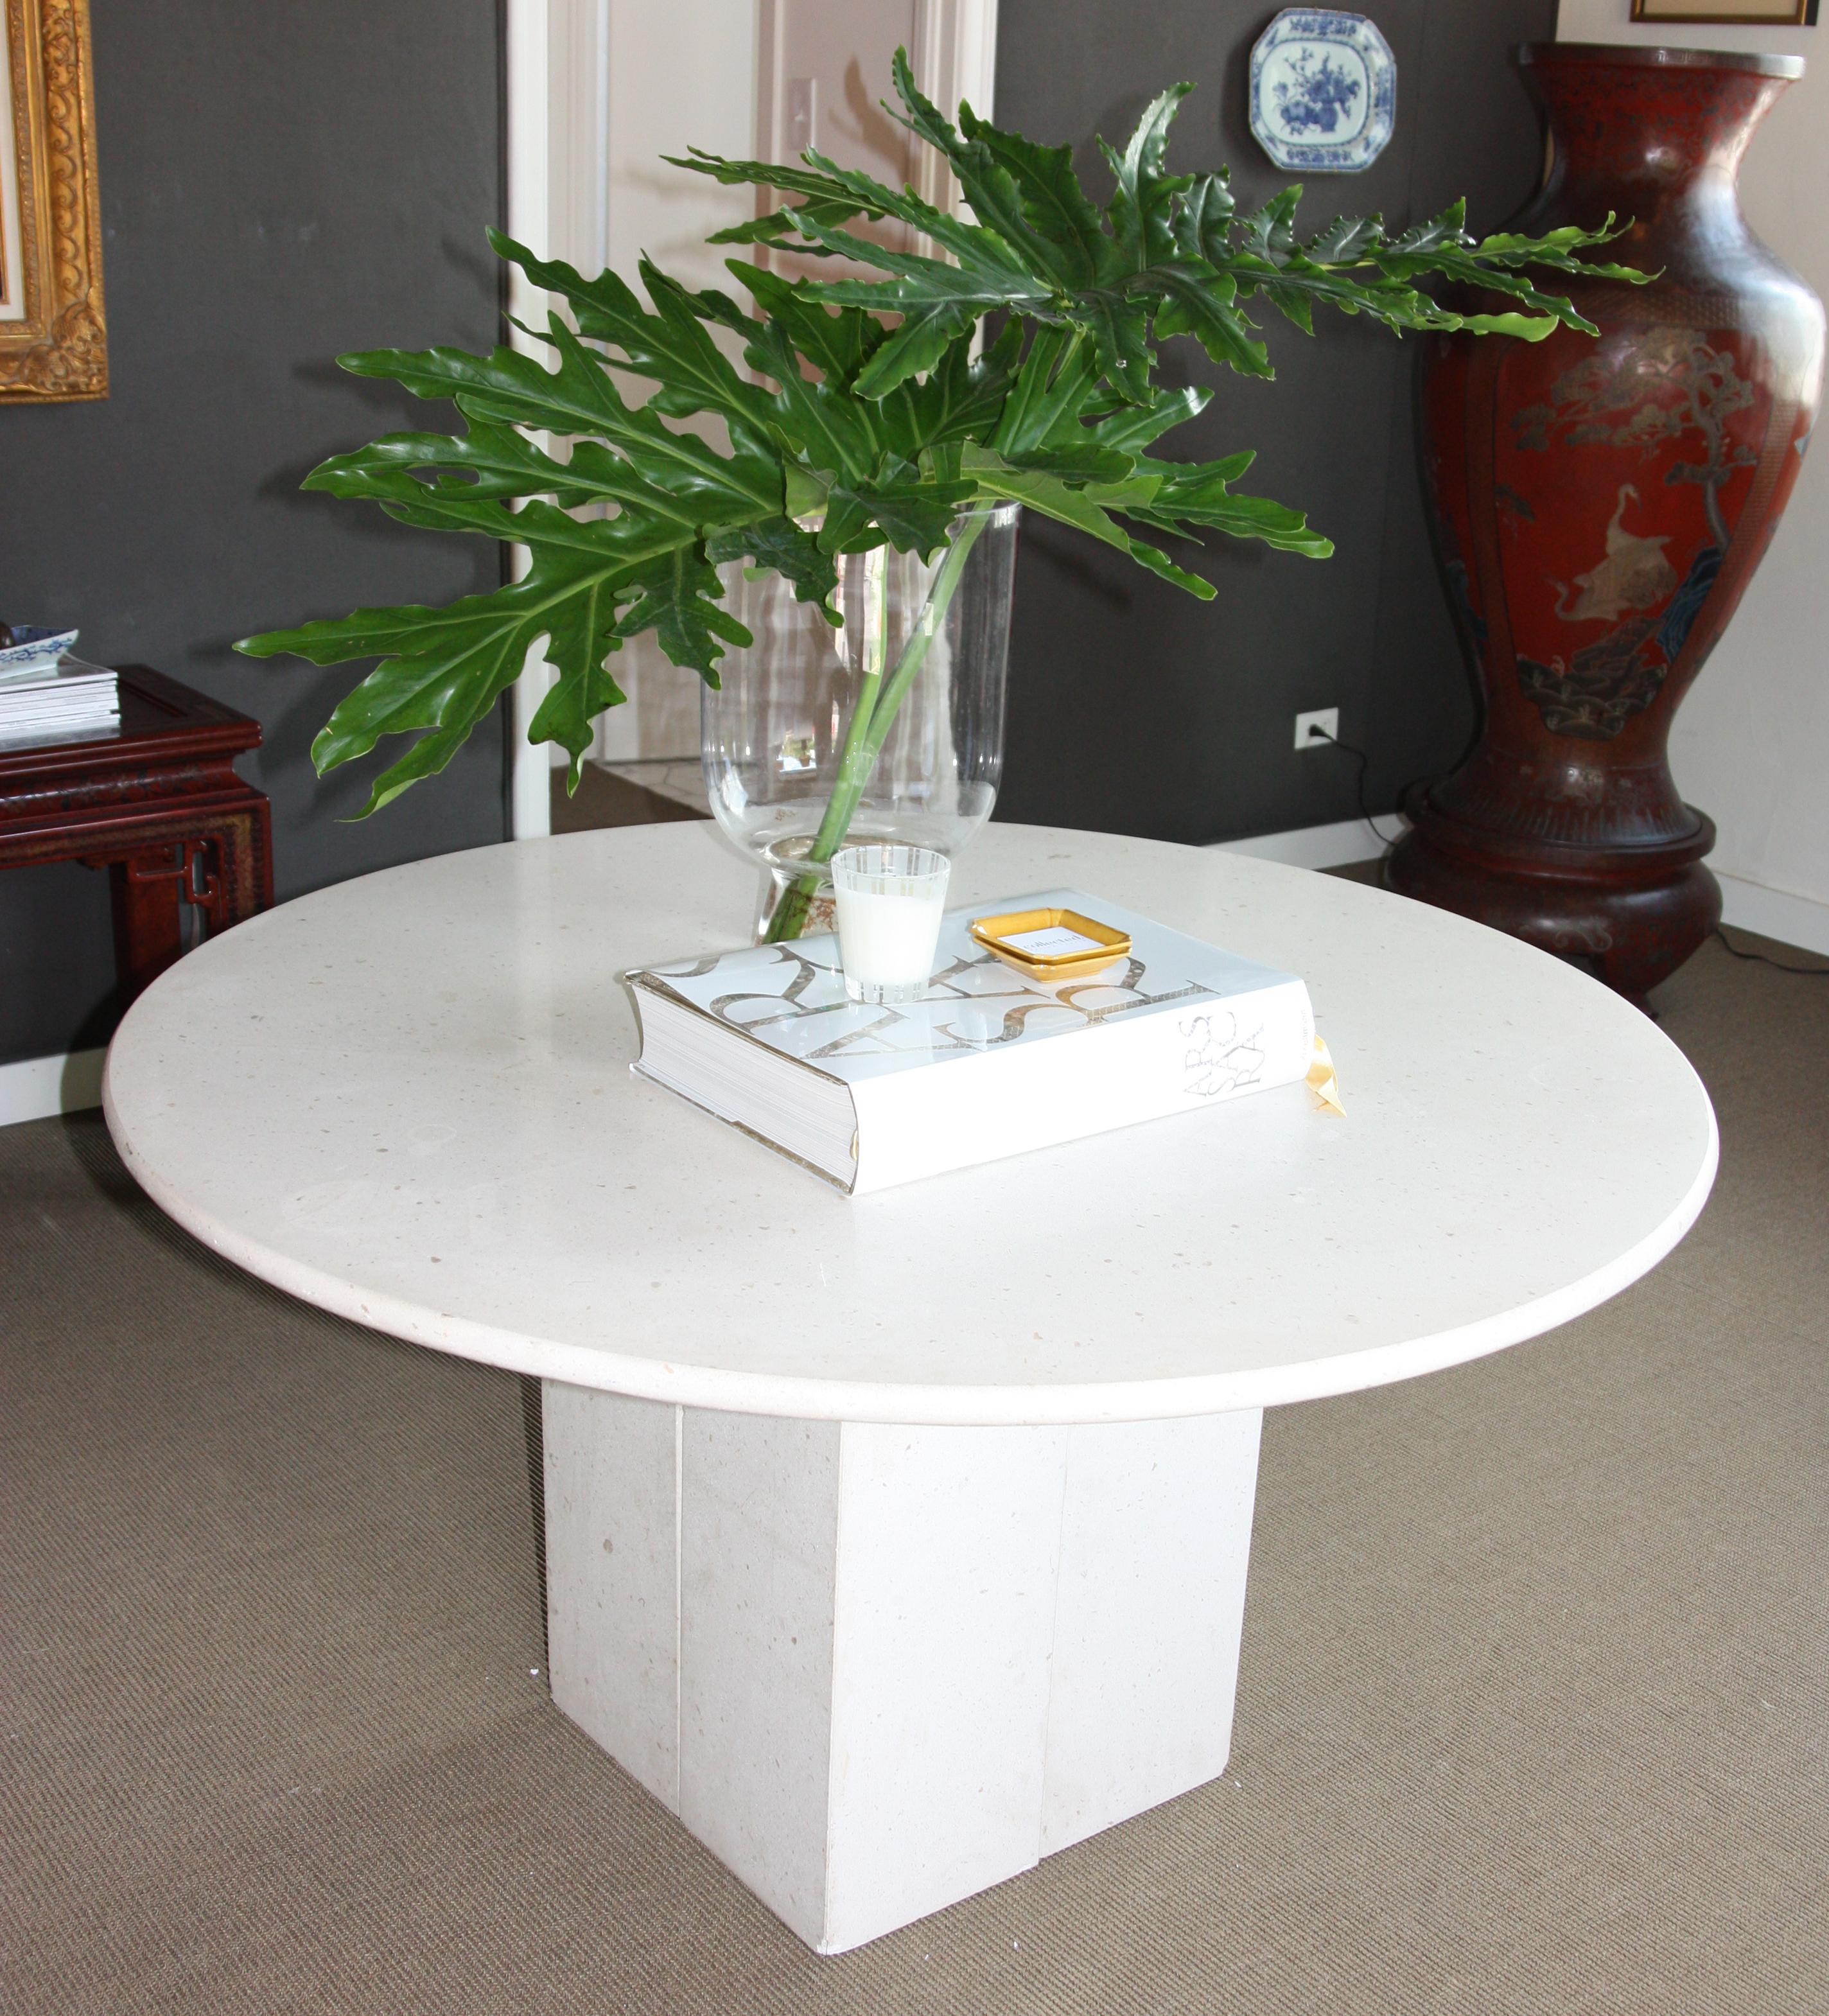 Circular limestone table with square base. The base is modular and can be adjusted to create different shapes.